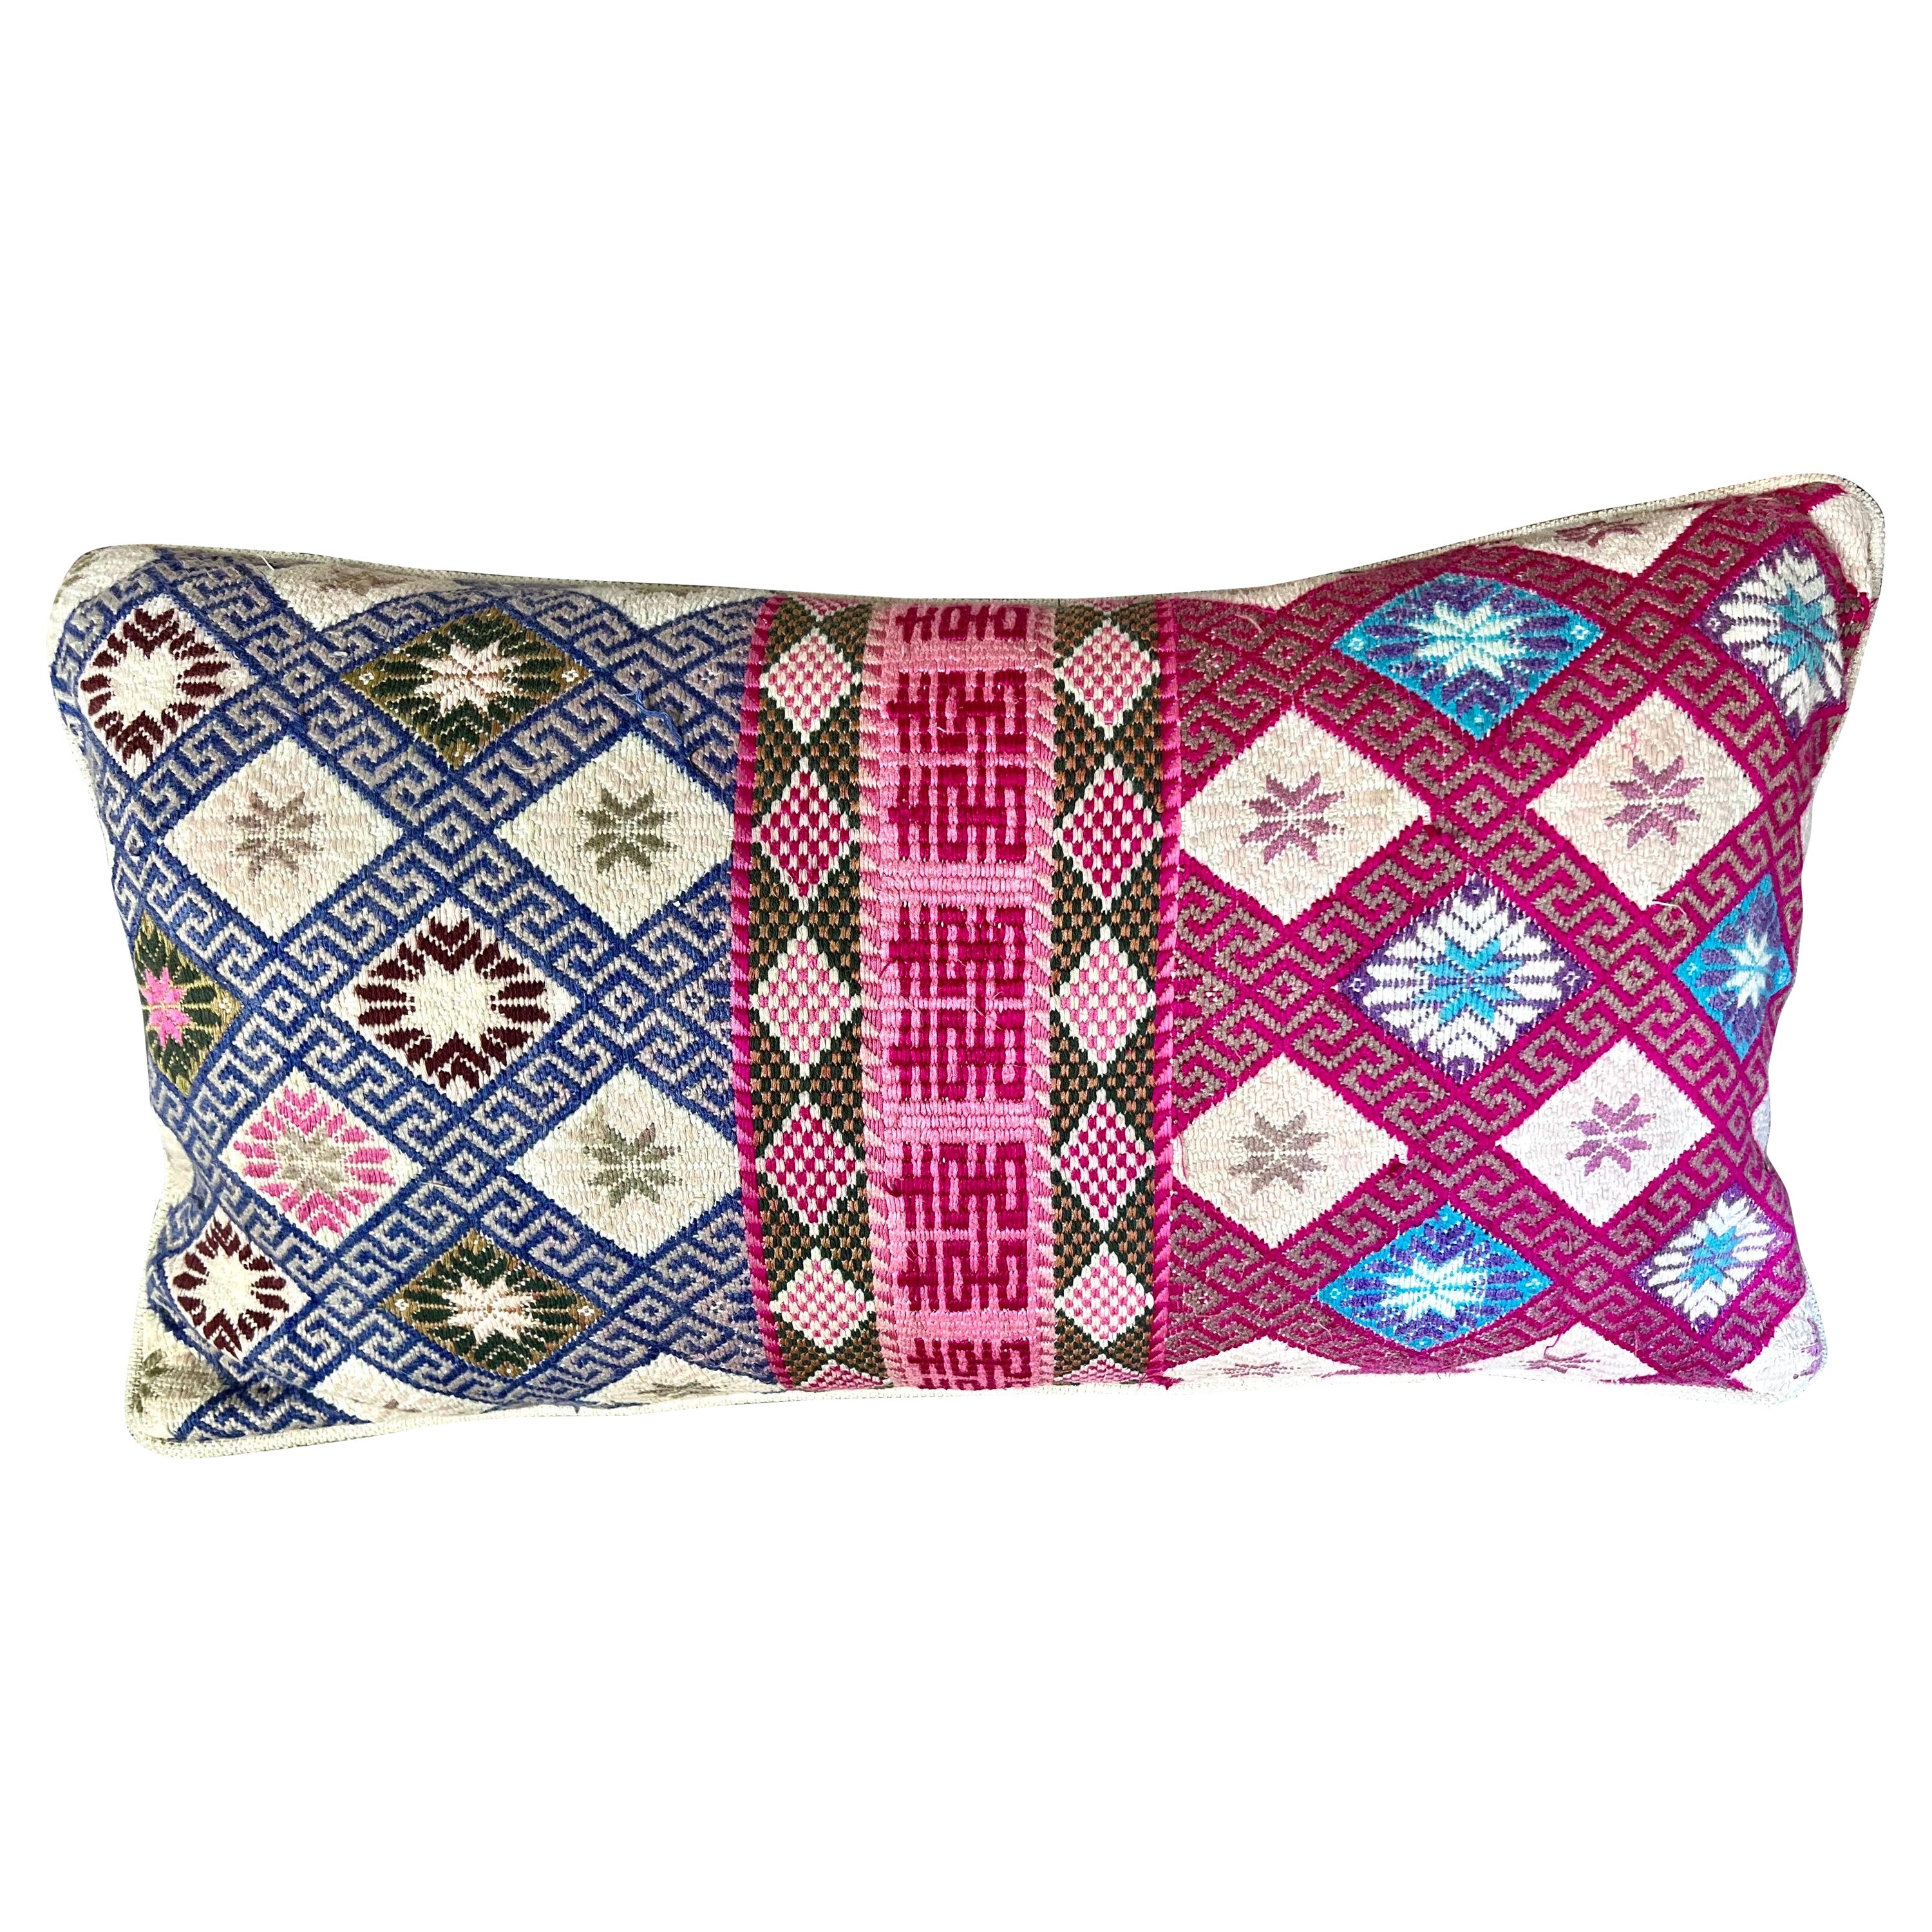 Pair of Vibrant Woven Geometric Tribal Style Pillows